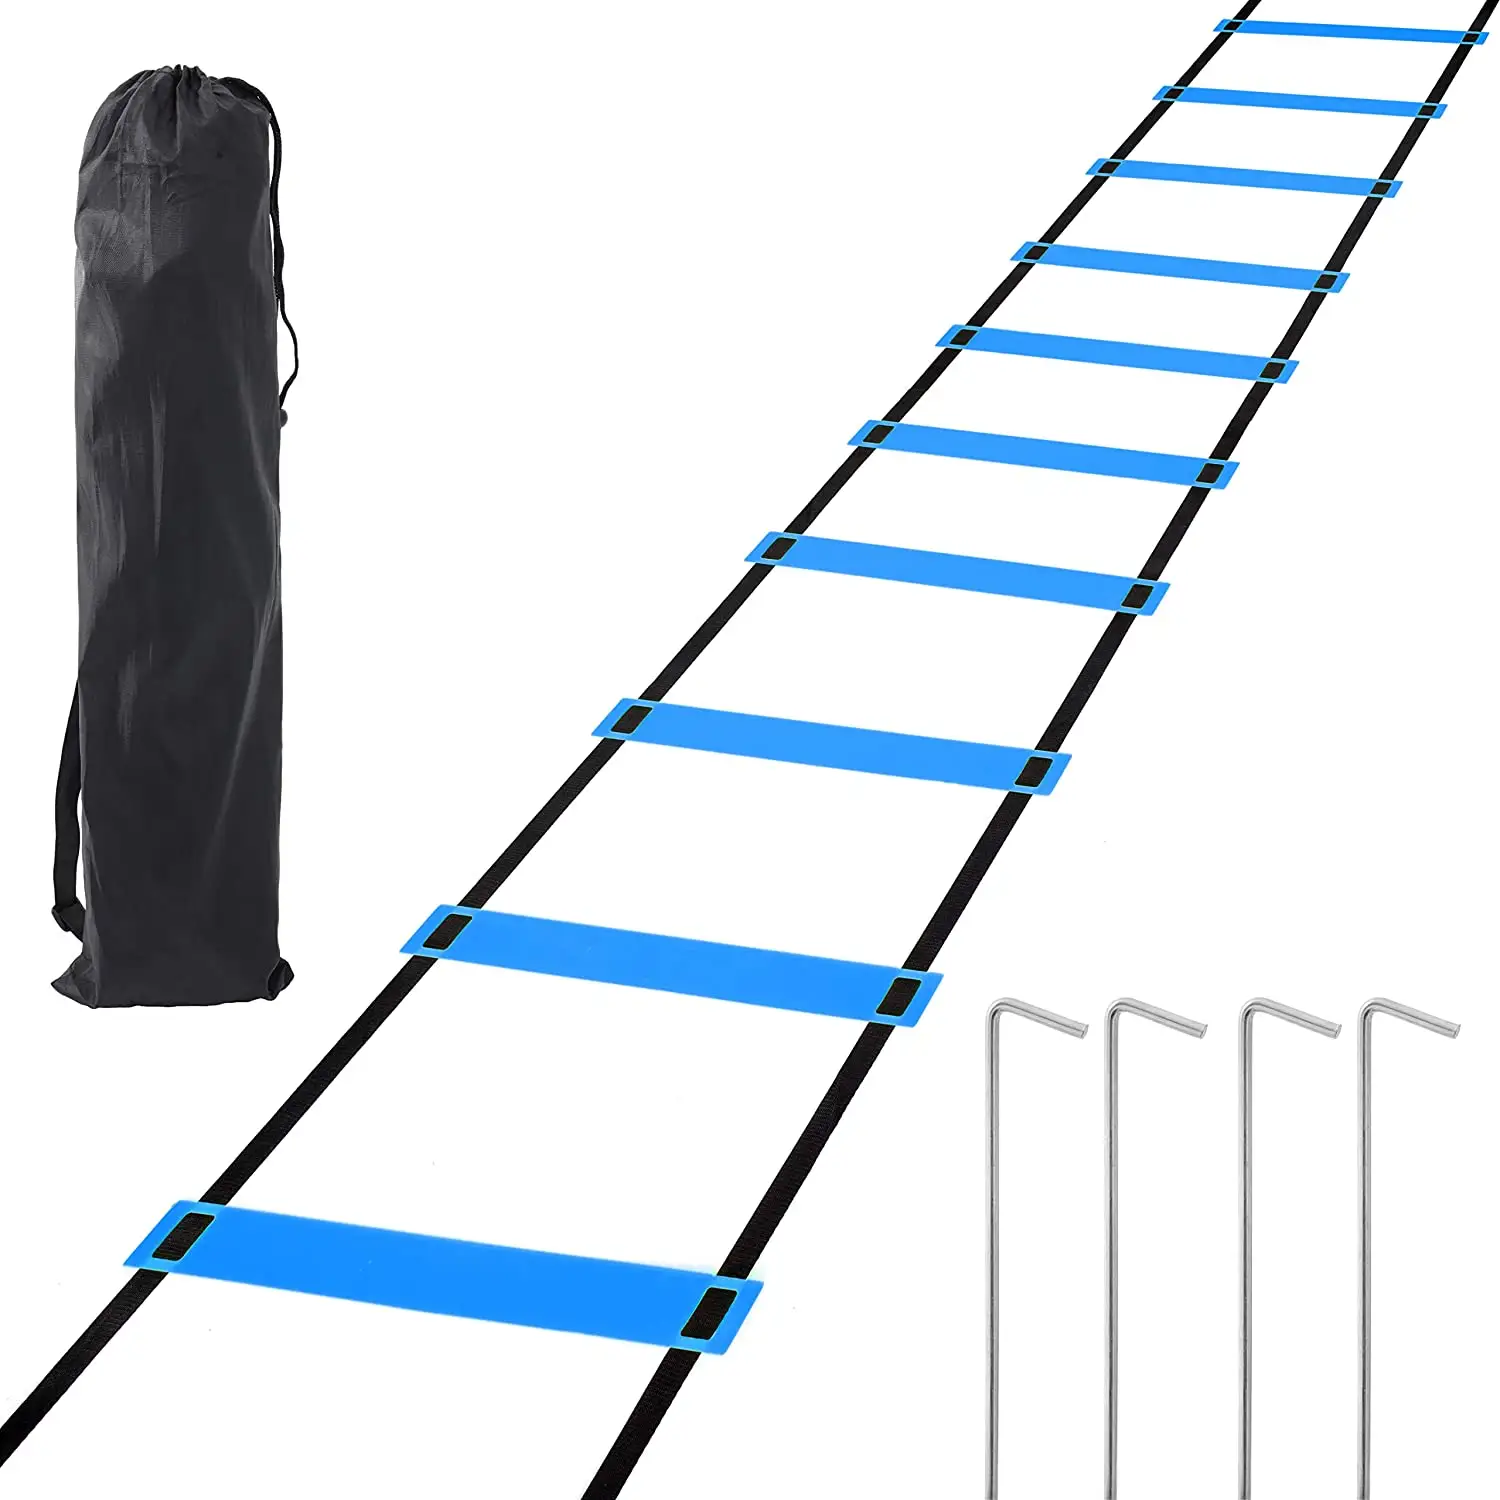 7 Meters 13 Rungs Agility Ladder Training Ladder For Soccer Basketball Trainers Feet Training Equipment With 1 Carry Bag 4 Nails